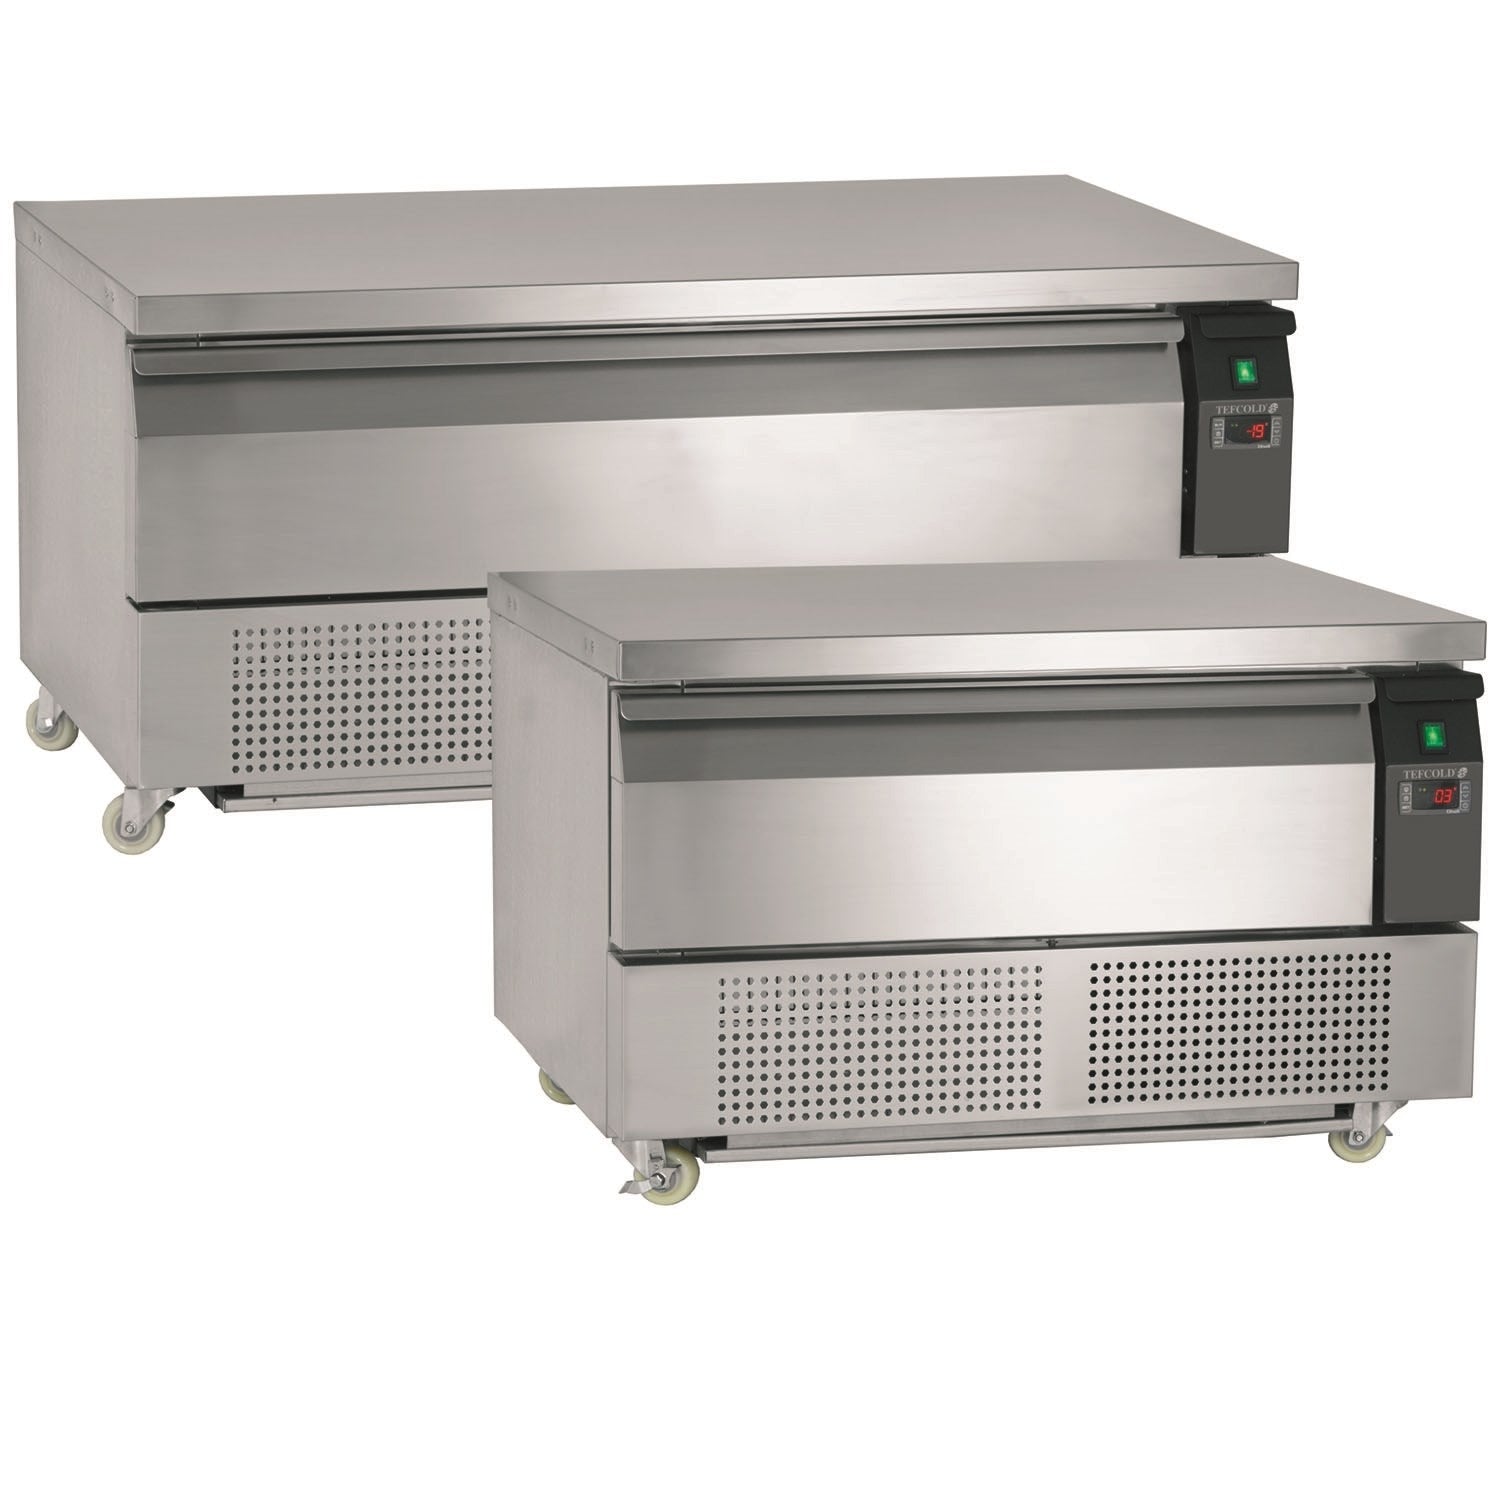 Tefcold Uni-Drawer 1 Range Dual Temperature Gastronorm Counter.Product Ref:00807.Model:UD1-3. 🚚 1-3 Days Delivery